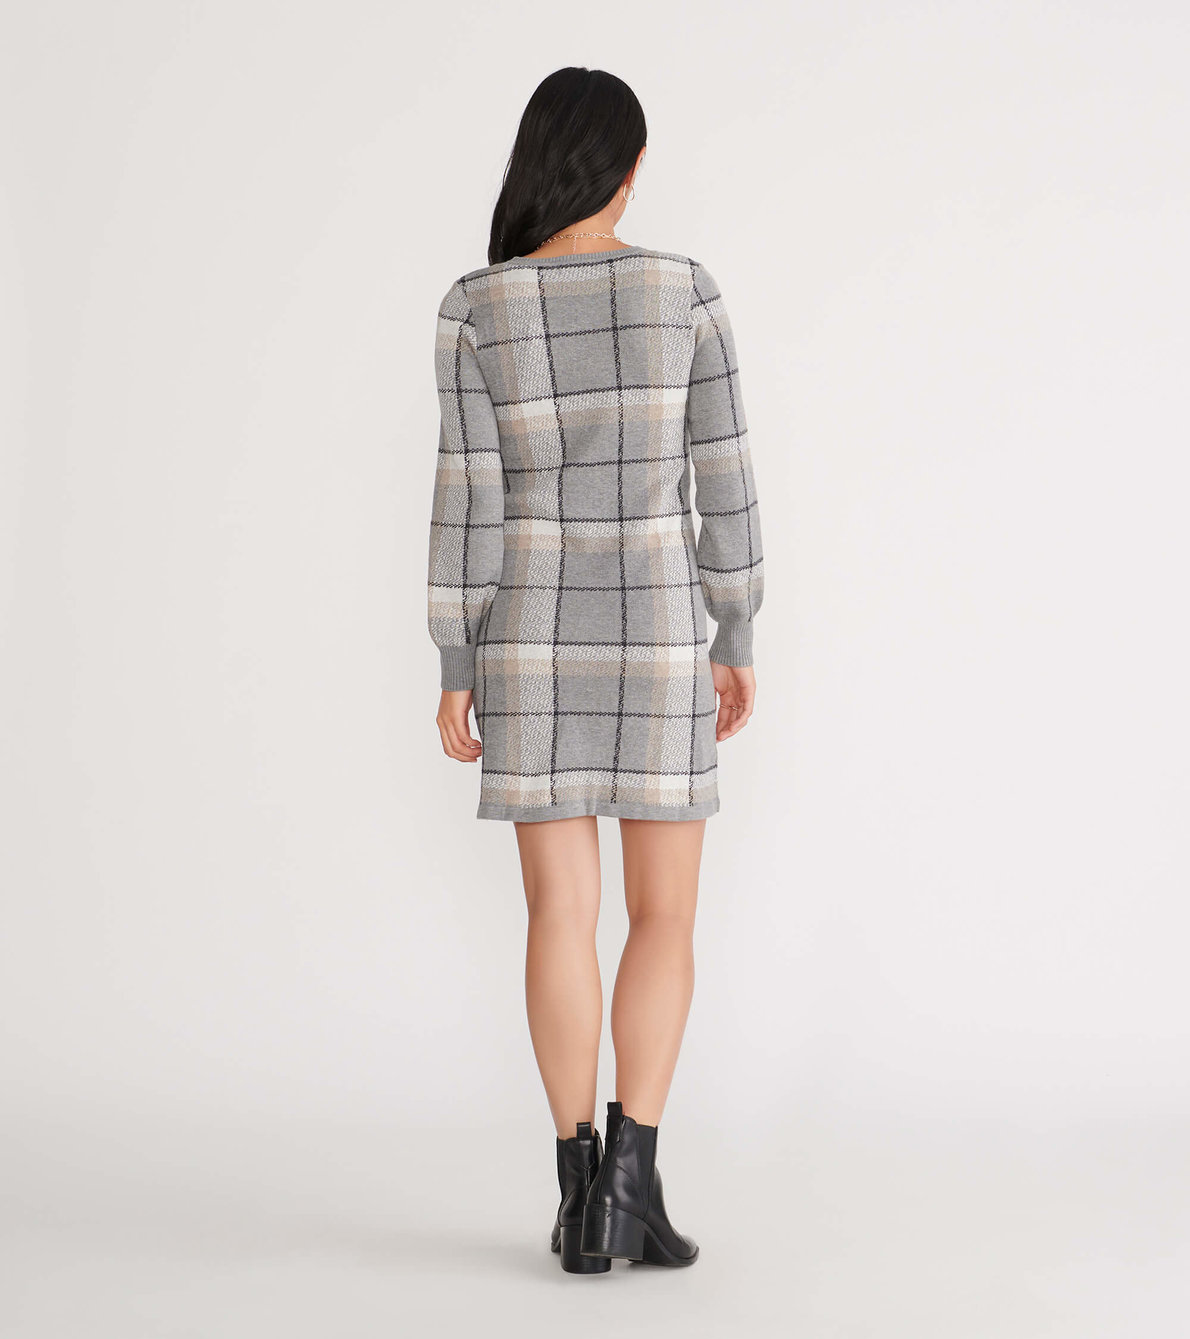 View larger image of Abigail Sweater Dress - Cliffside Plaid